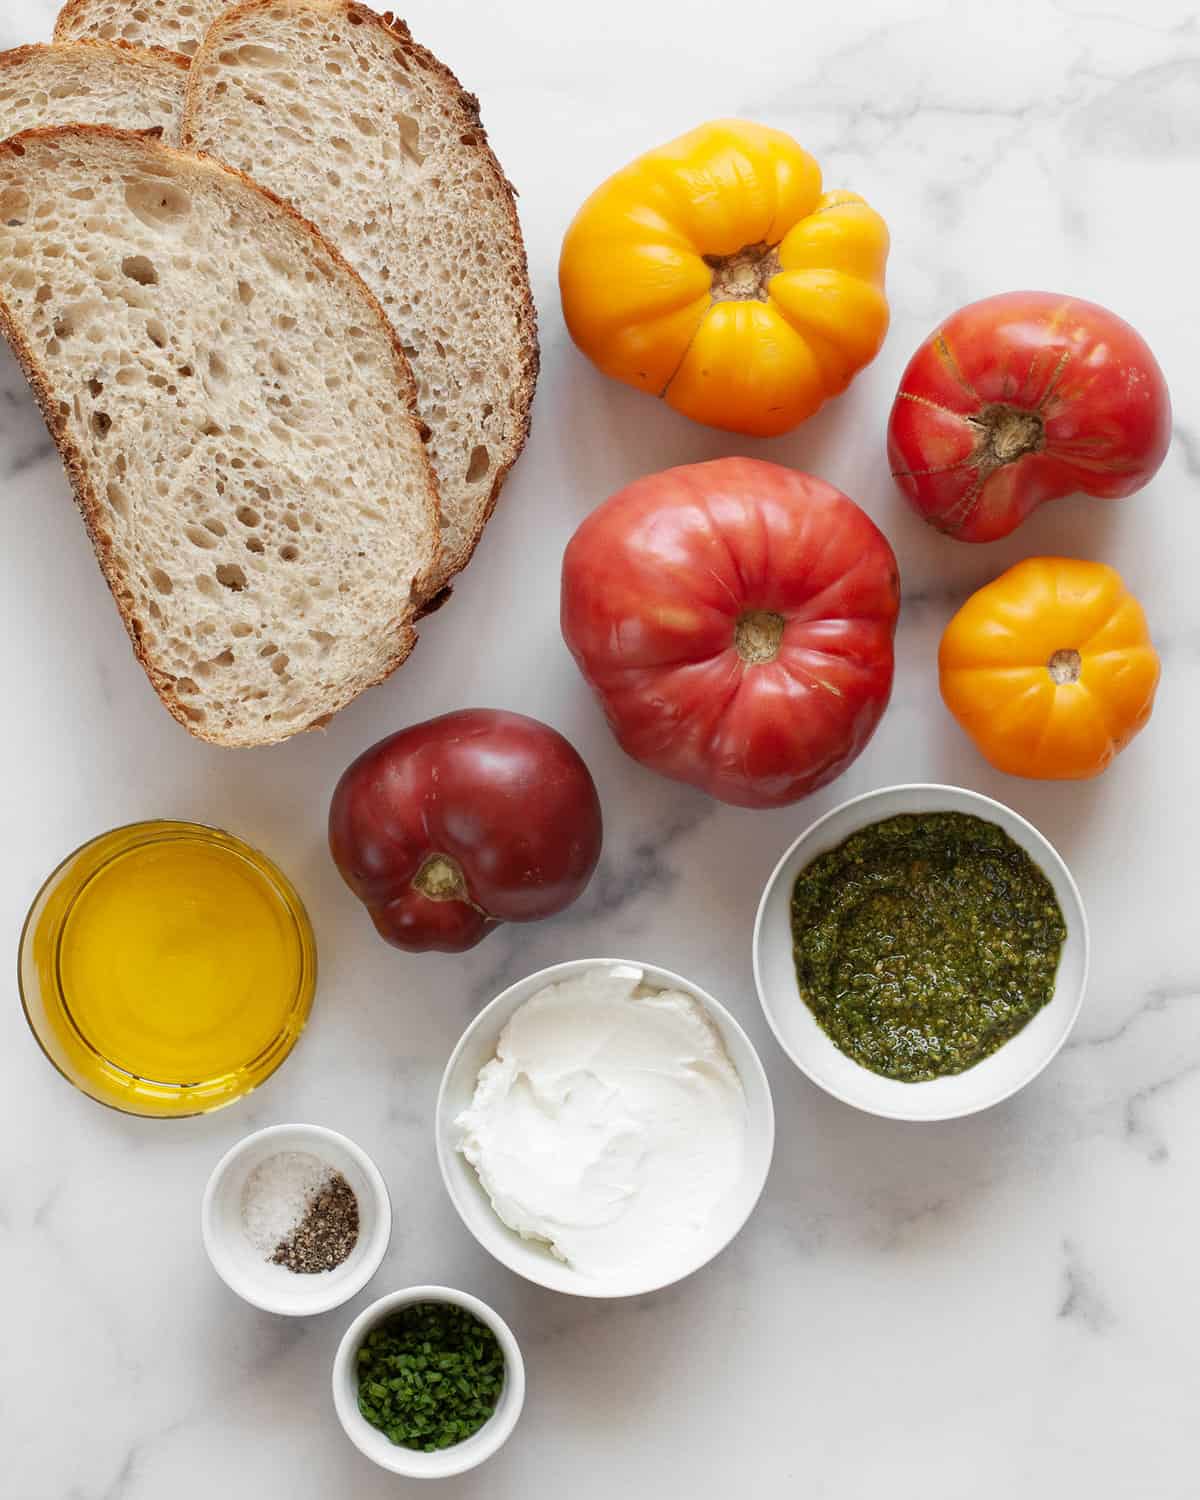 Ingredients including heirloom tomatoes, bread, olive oil, salt, pepper, pesto, cheese and chives.